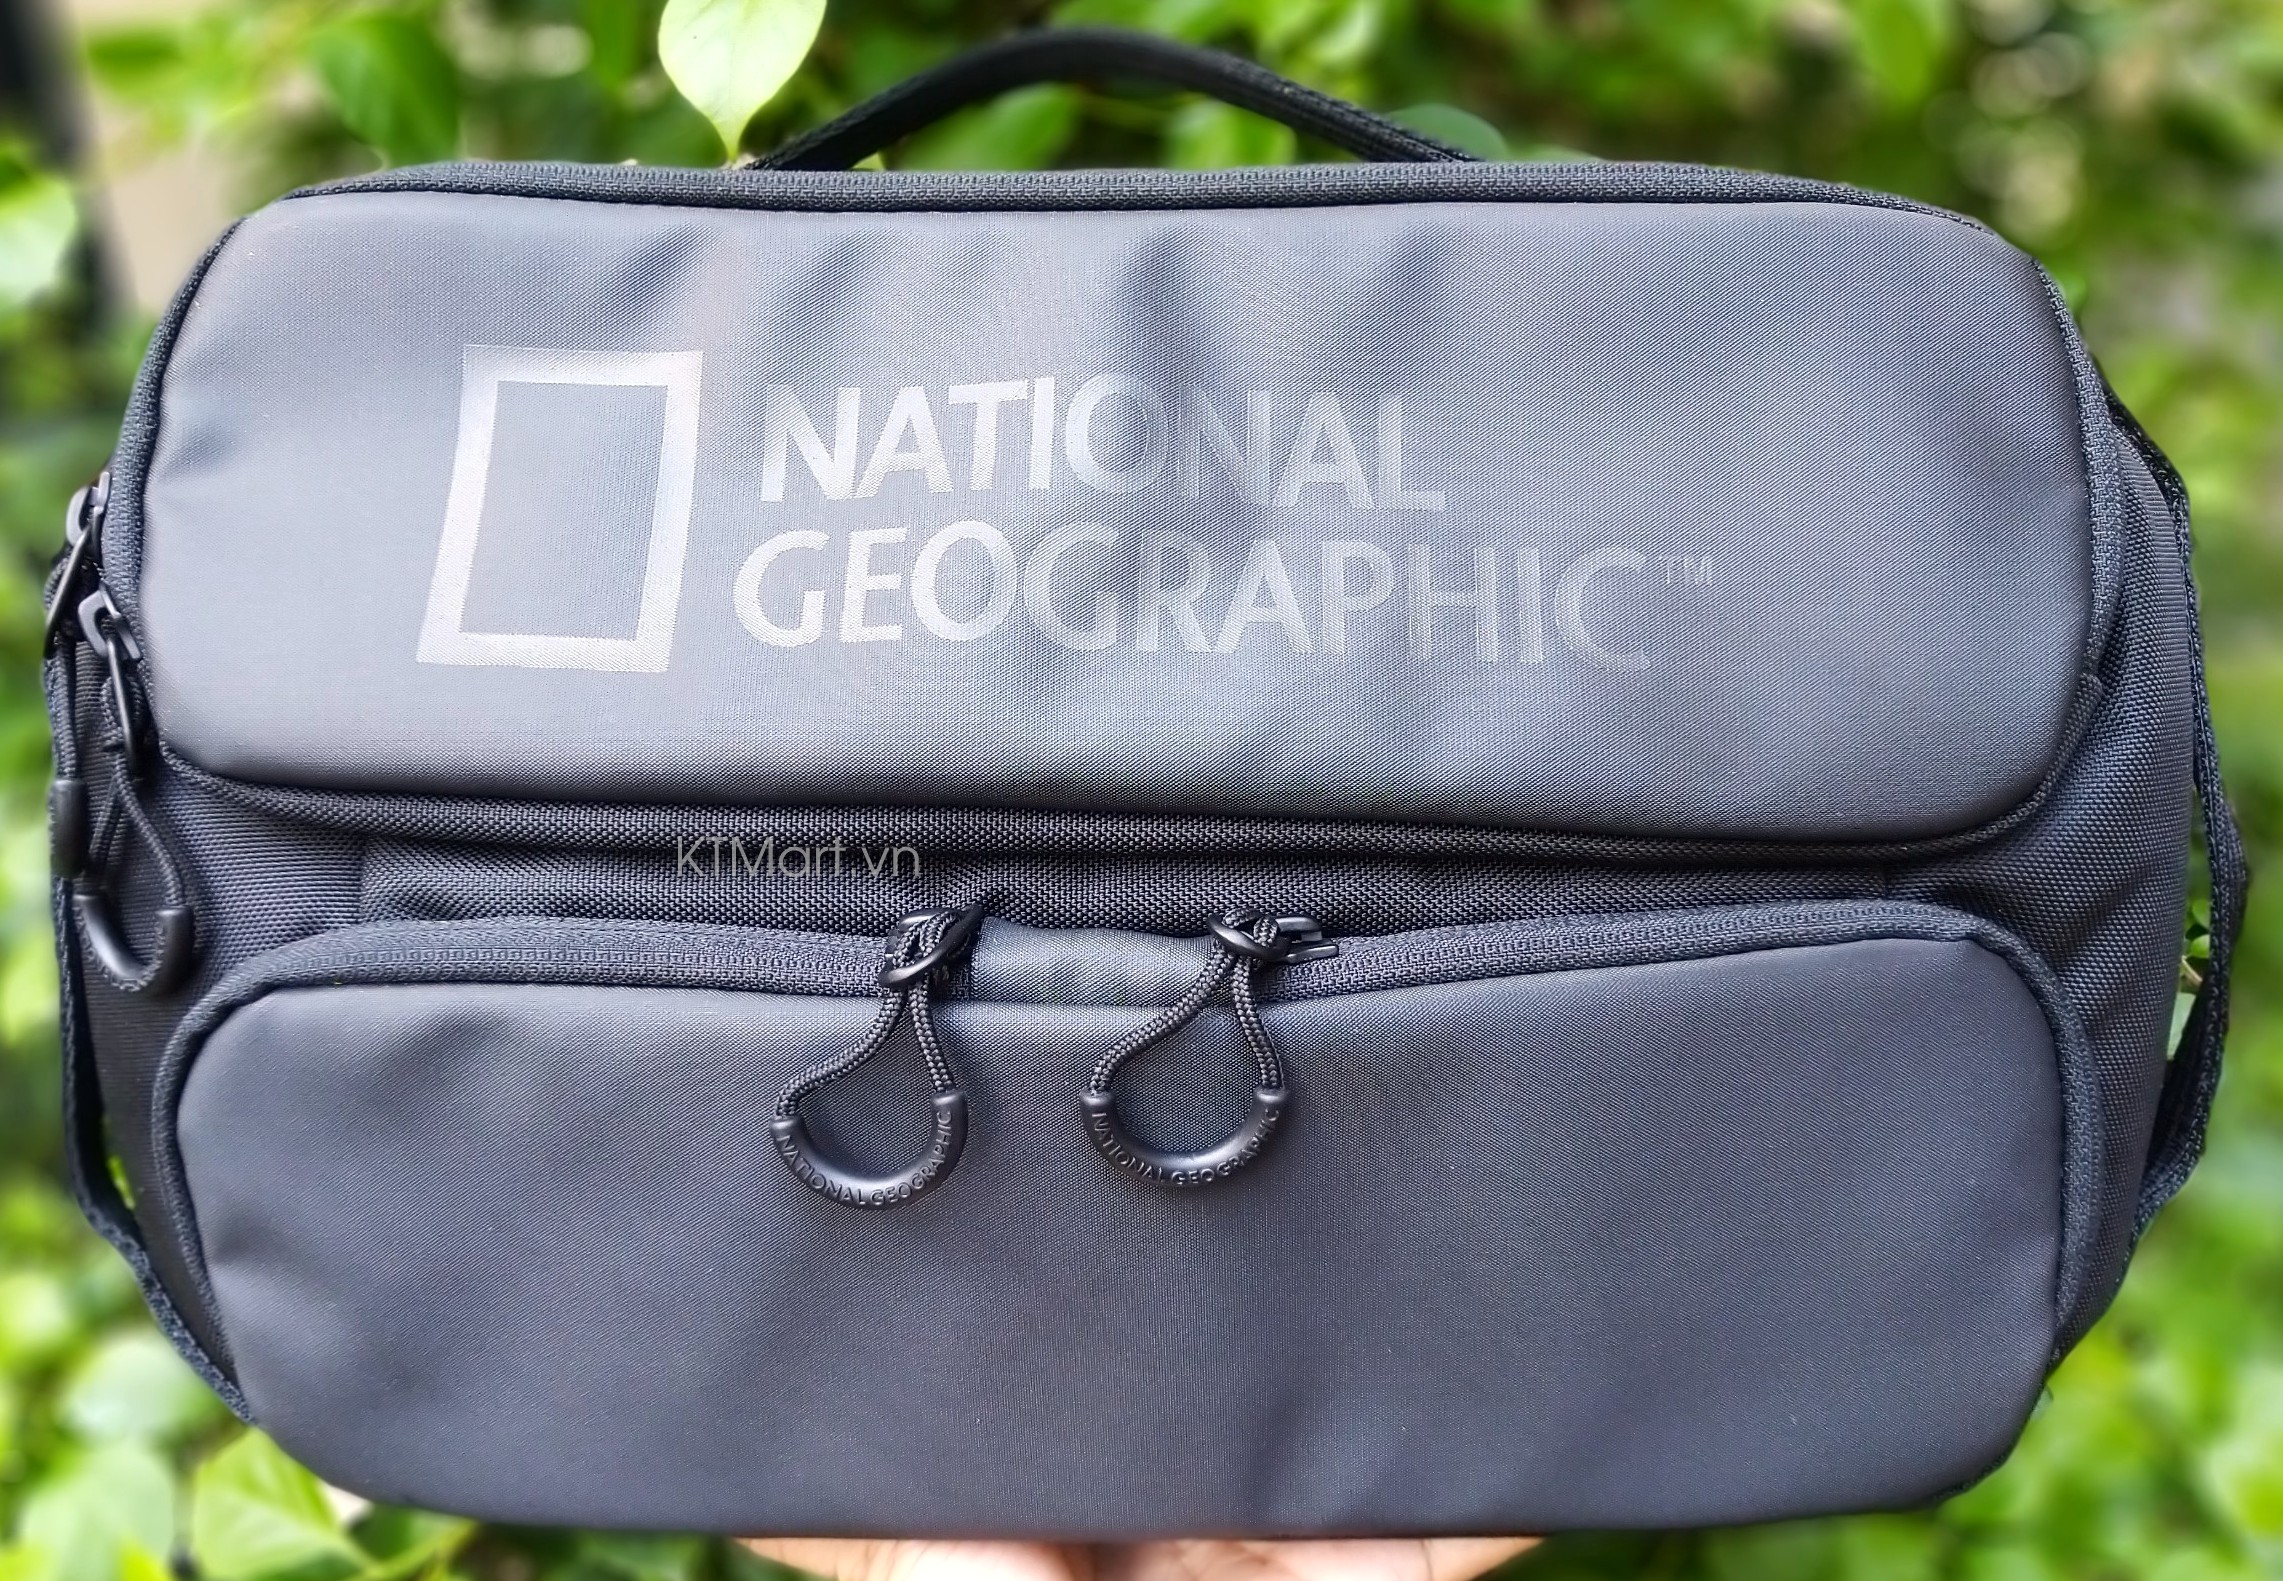 National Geographic Bag